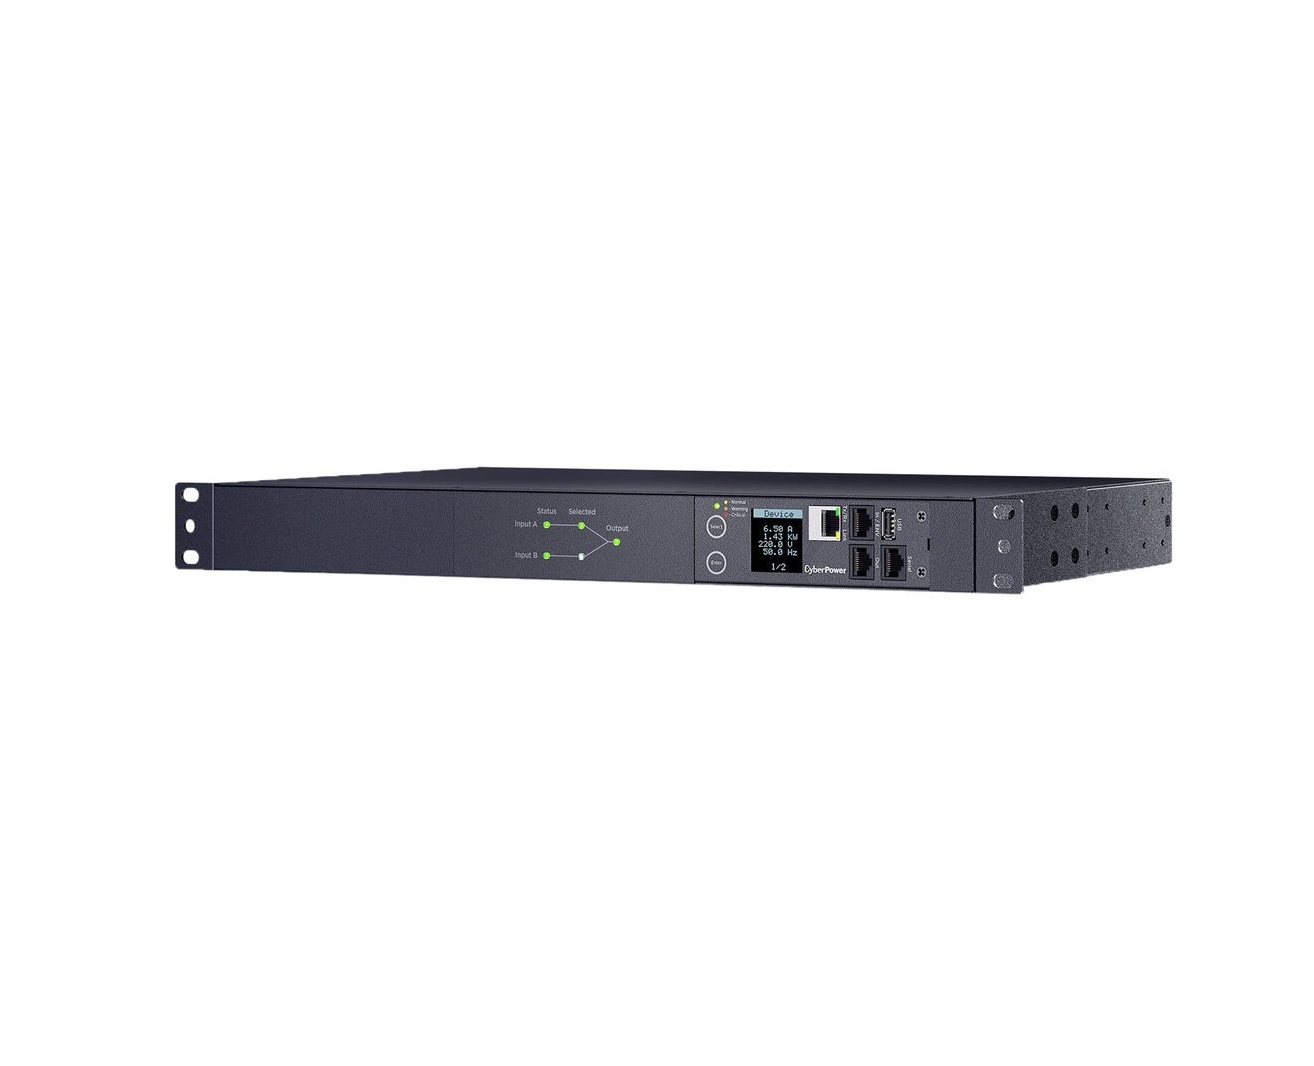 Cyberpower Switched Ats PDU 240V 20A 10-out 1U Rackmount PDU44006